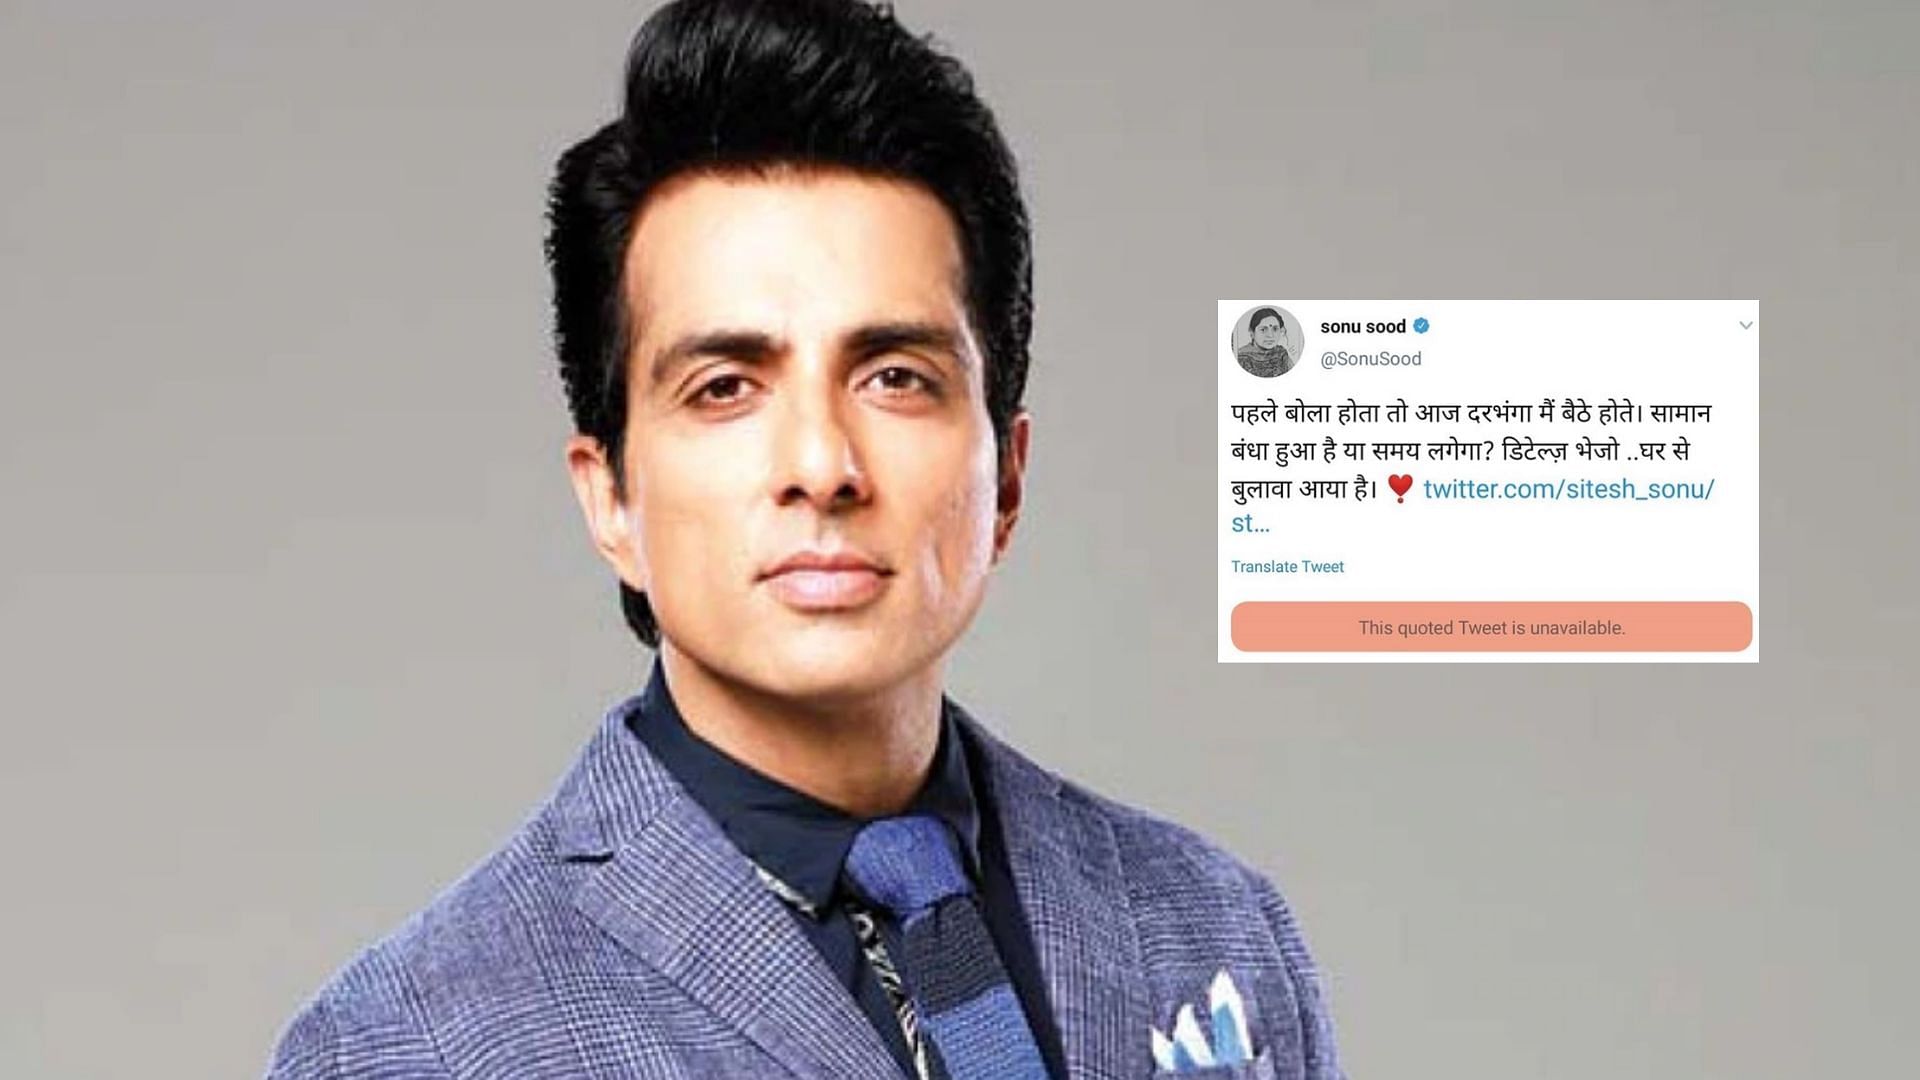 Sonu Sood says people tweet to check if they’ll be contacted and then delete the tweets.&nbsp;